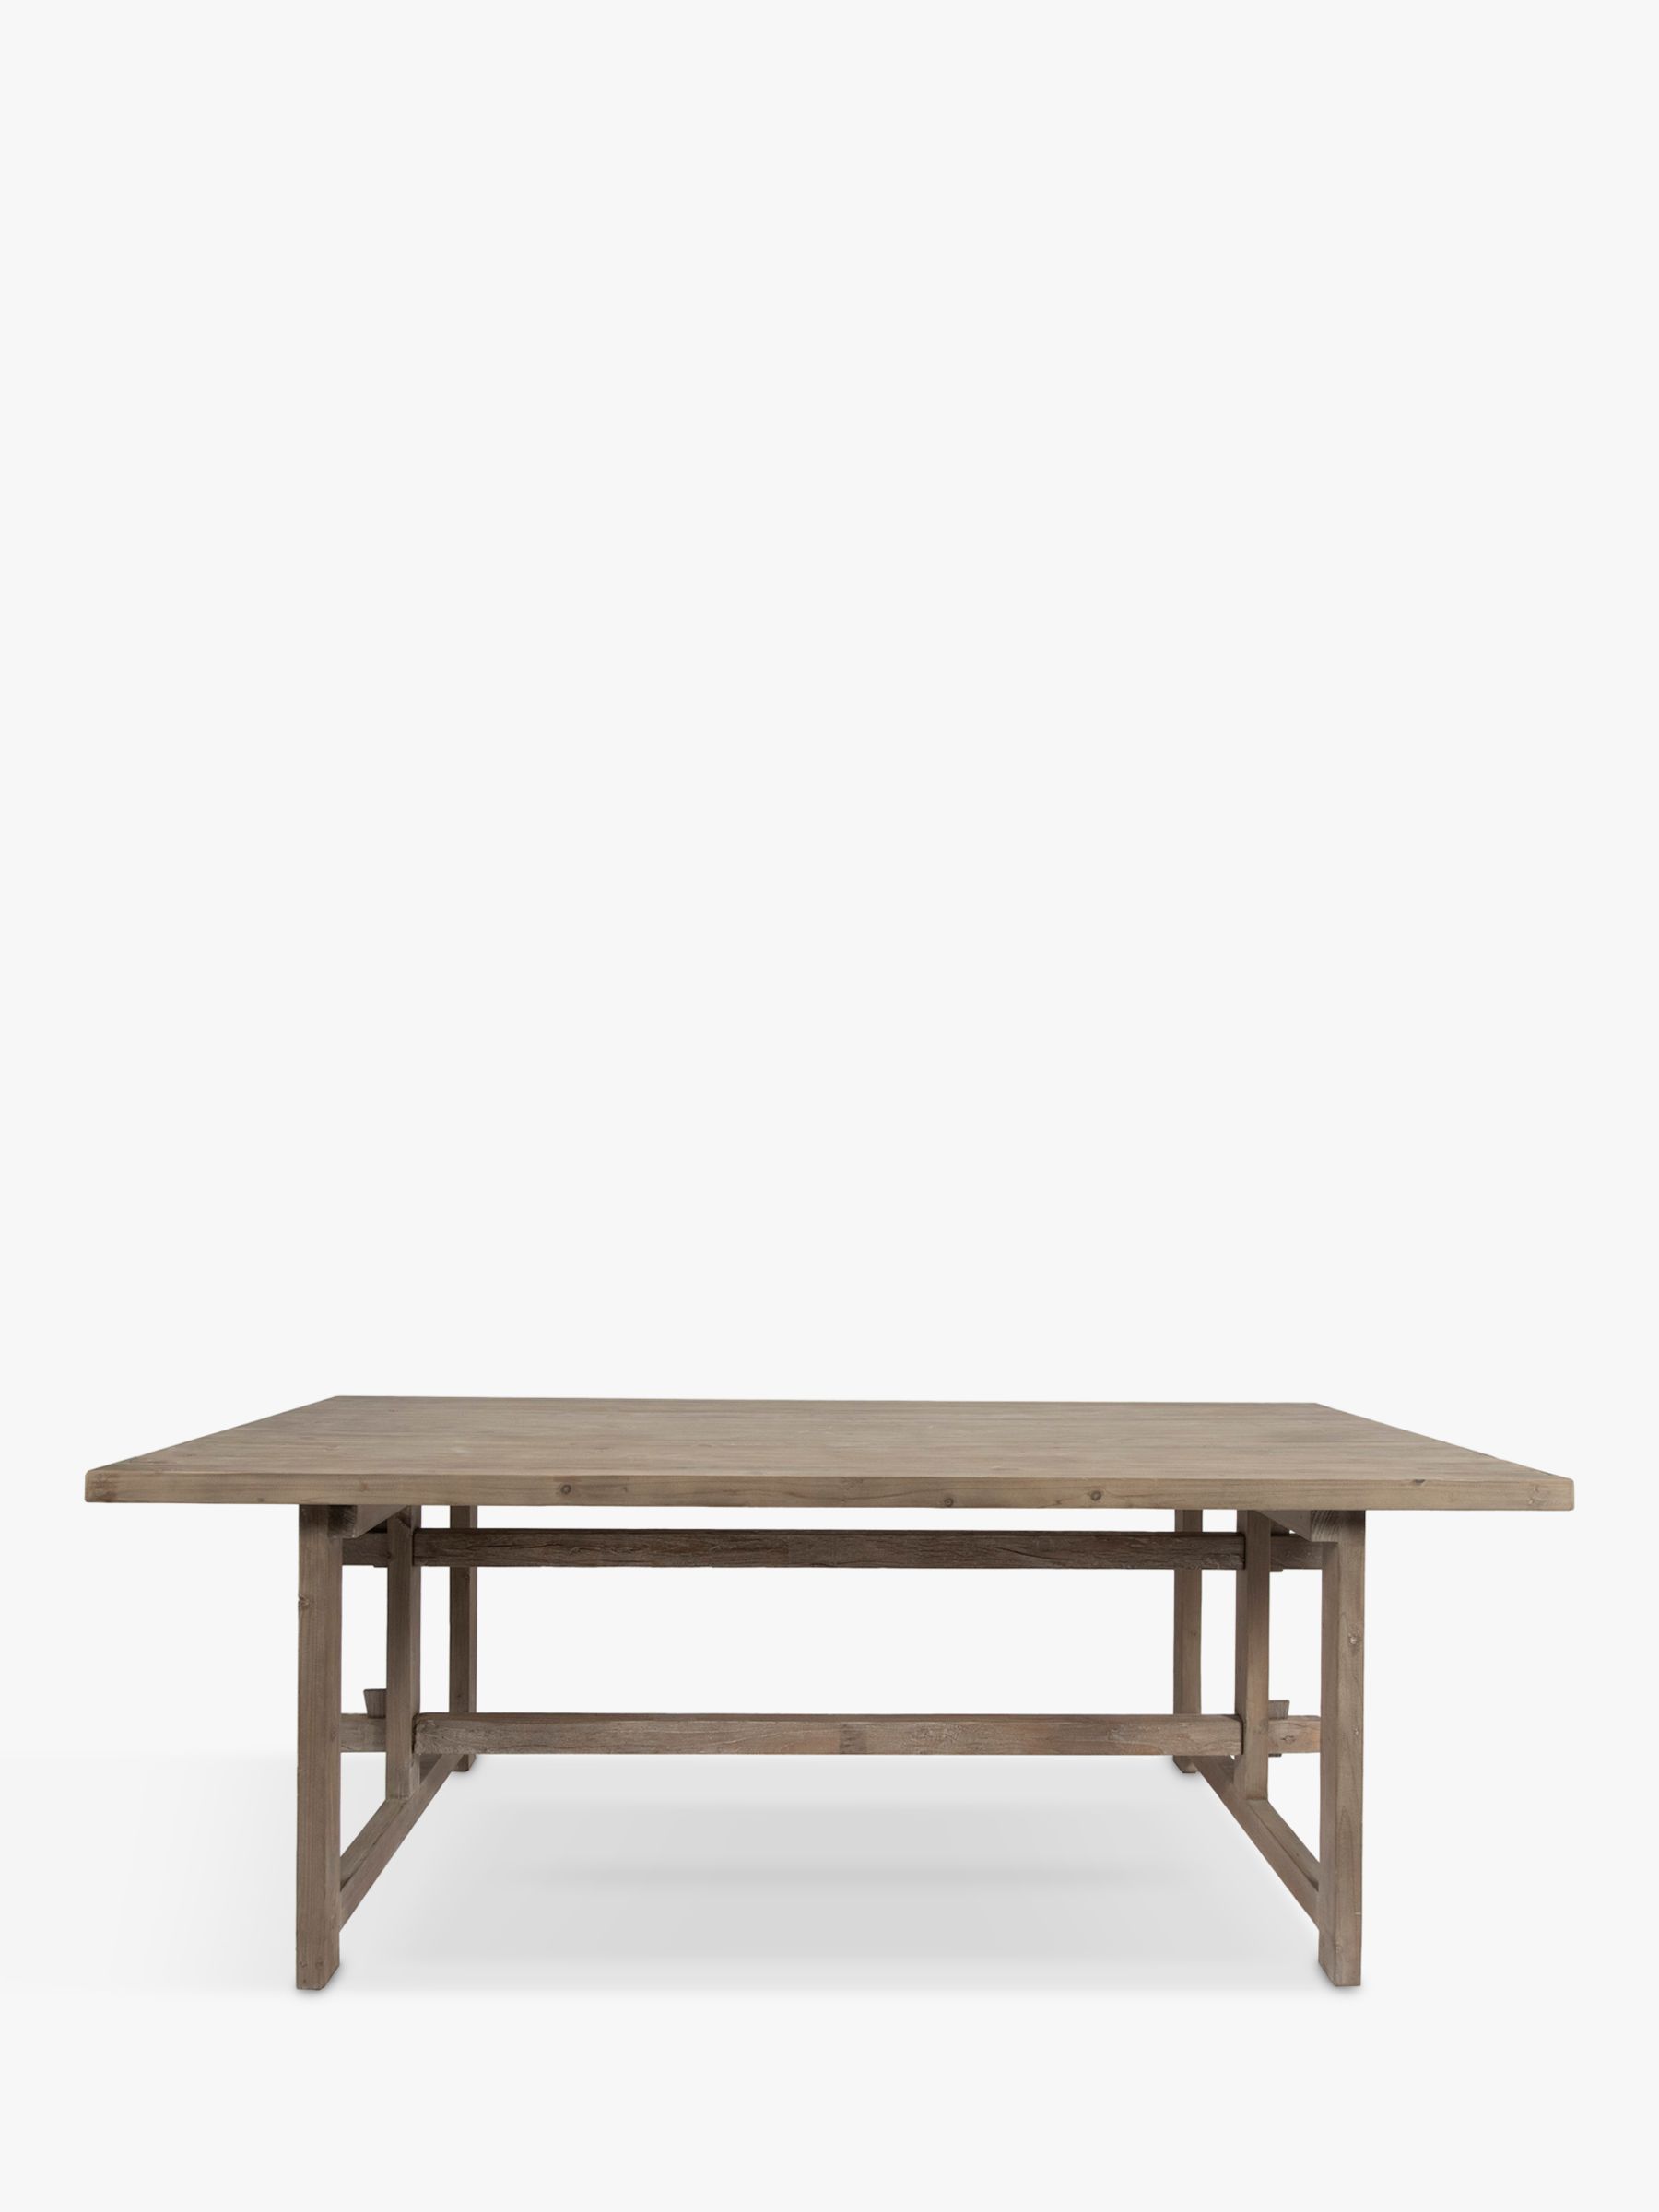 Photo of One.world monomay 6-seater recycled pine wood dining table natural